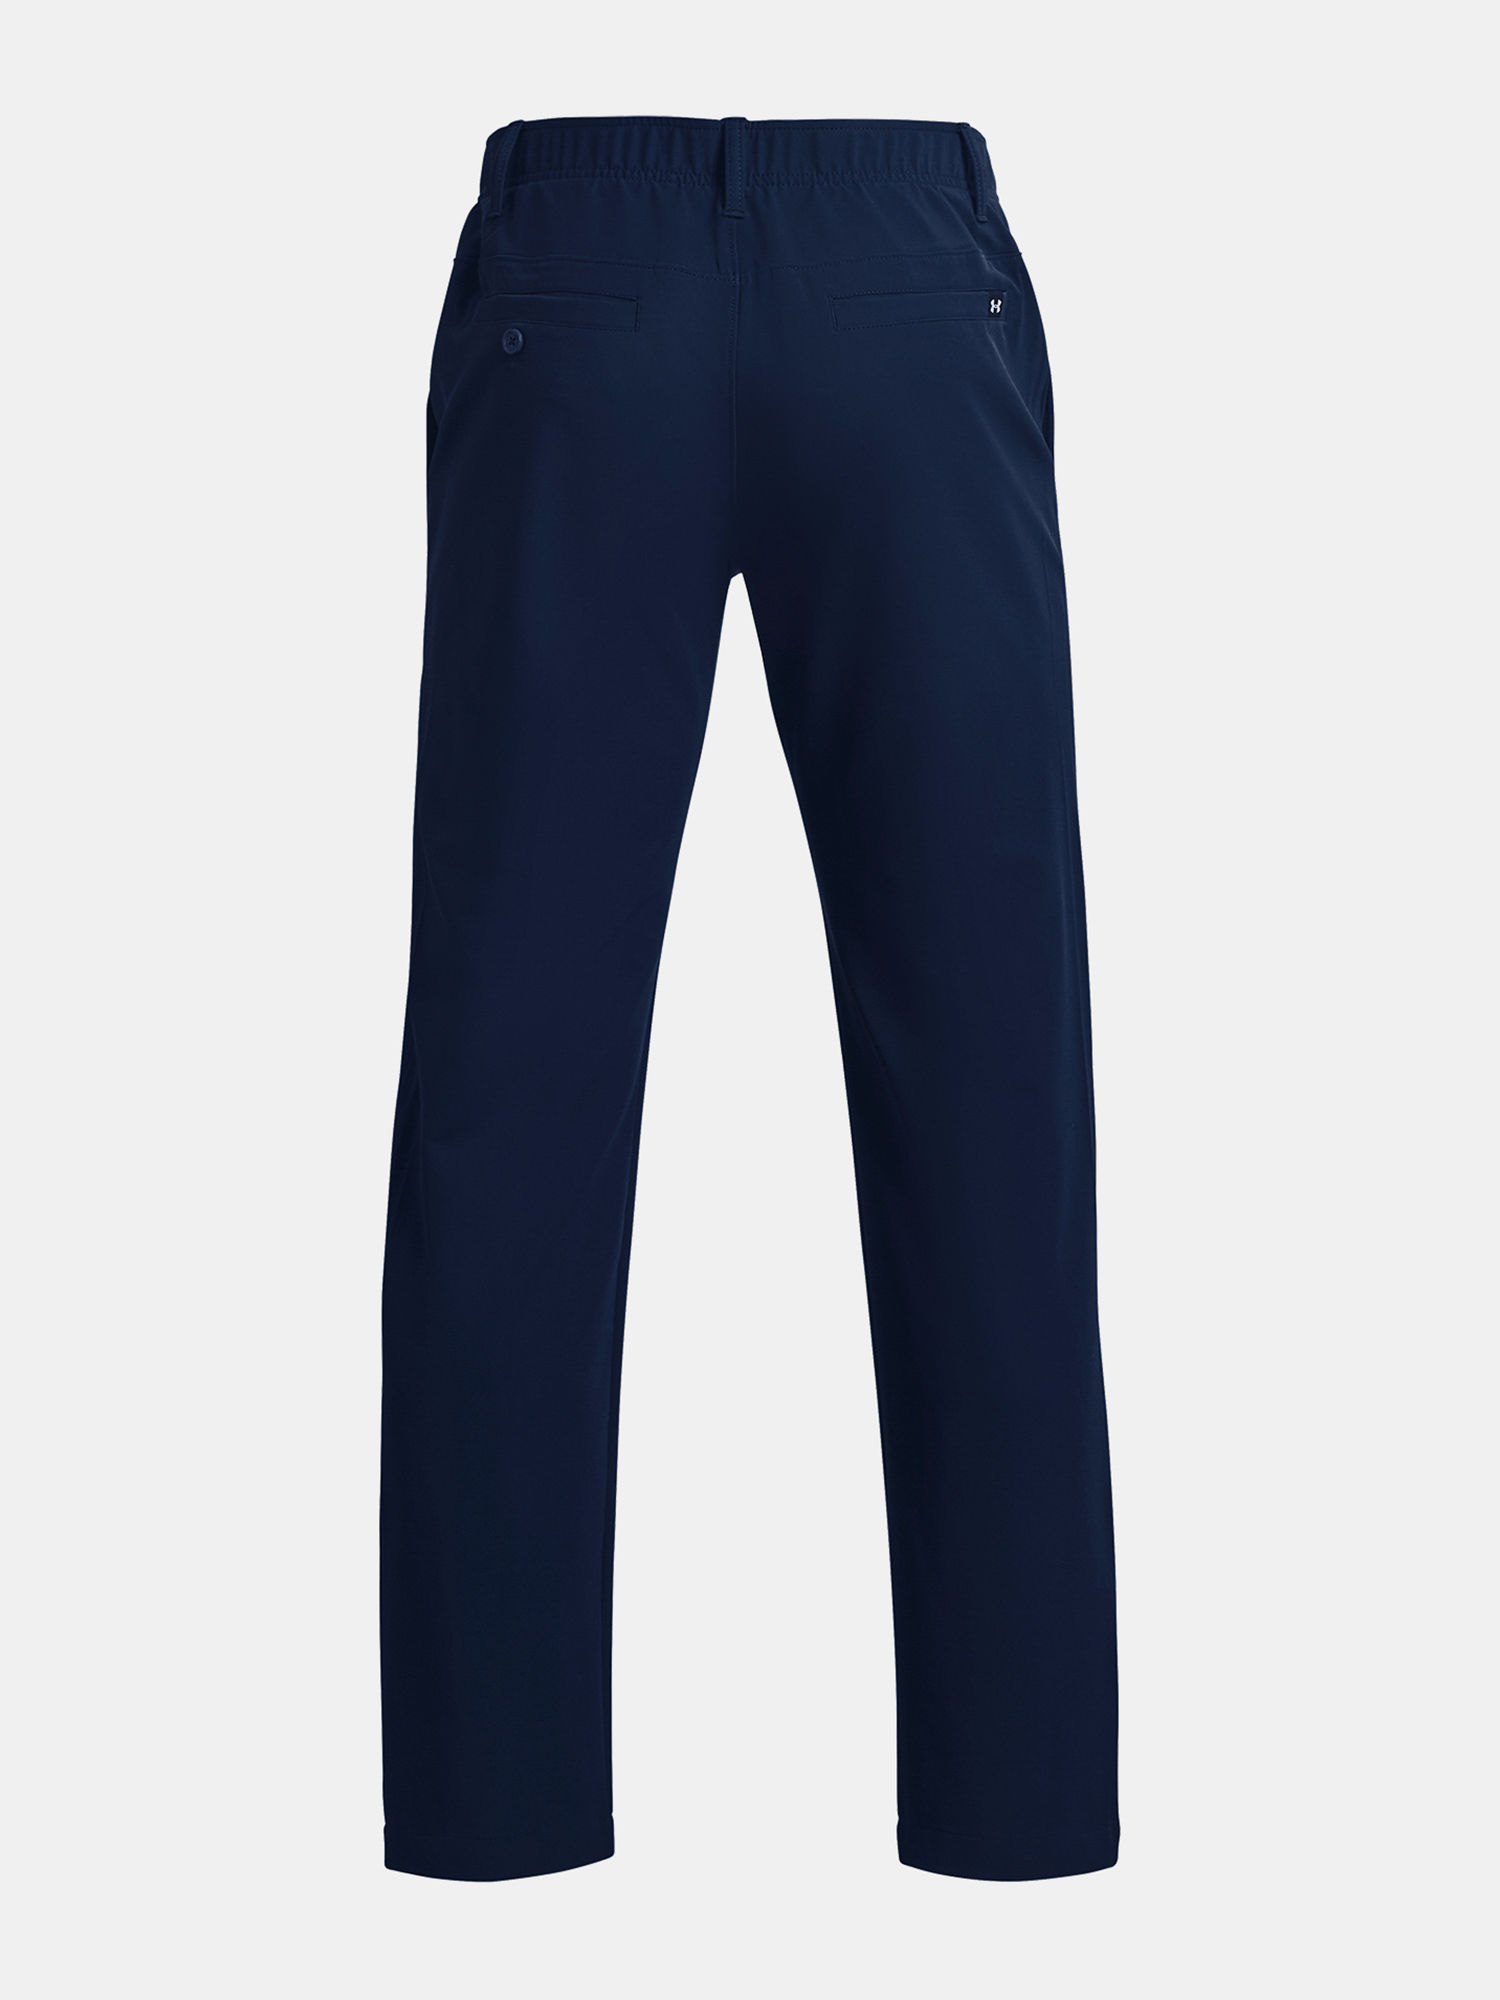 Nohavice Under Armour UA Drive Pant-NVY (4)